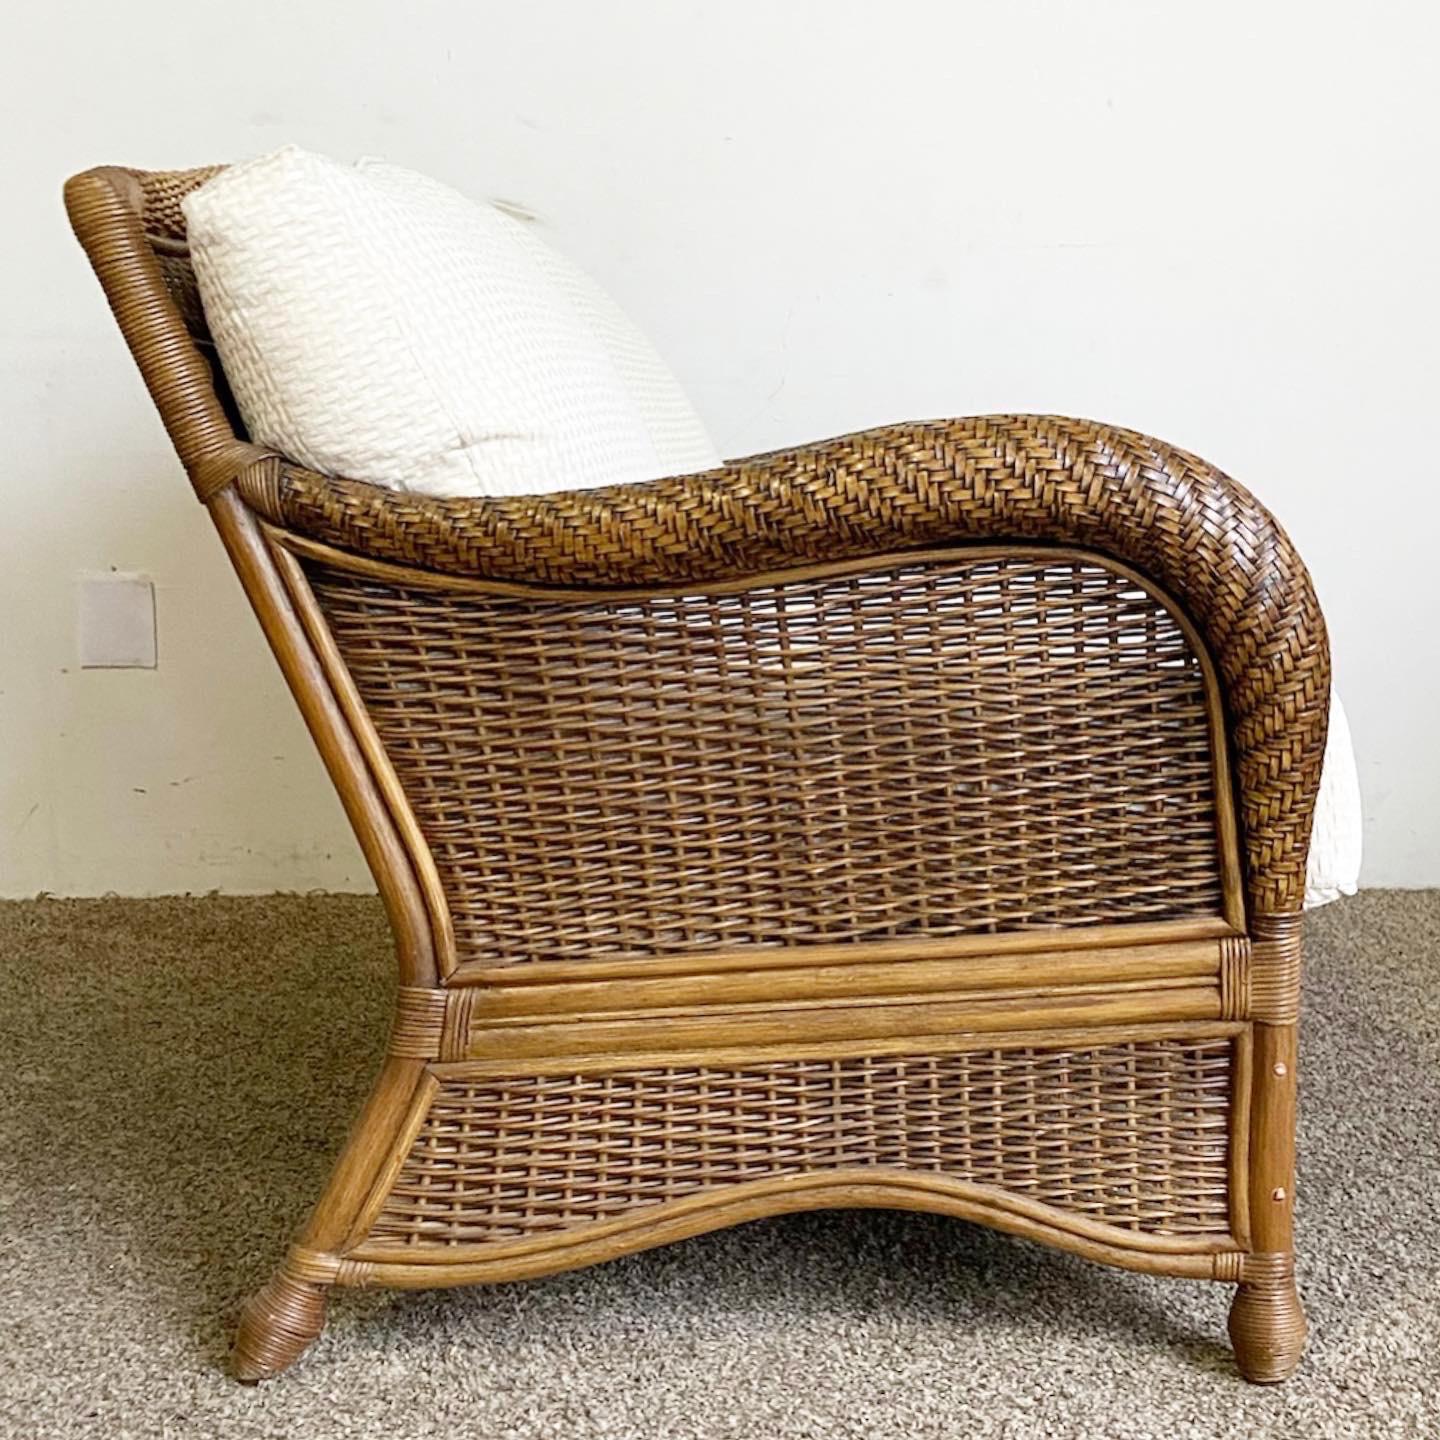 Bohemian Boho Chic Bamboo Rattan Wicker Love Seat With Cushions For Sale